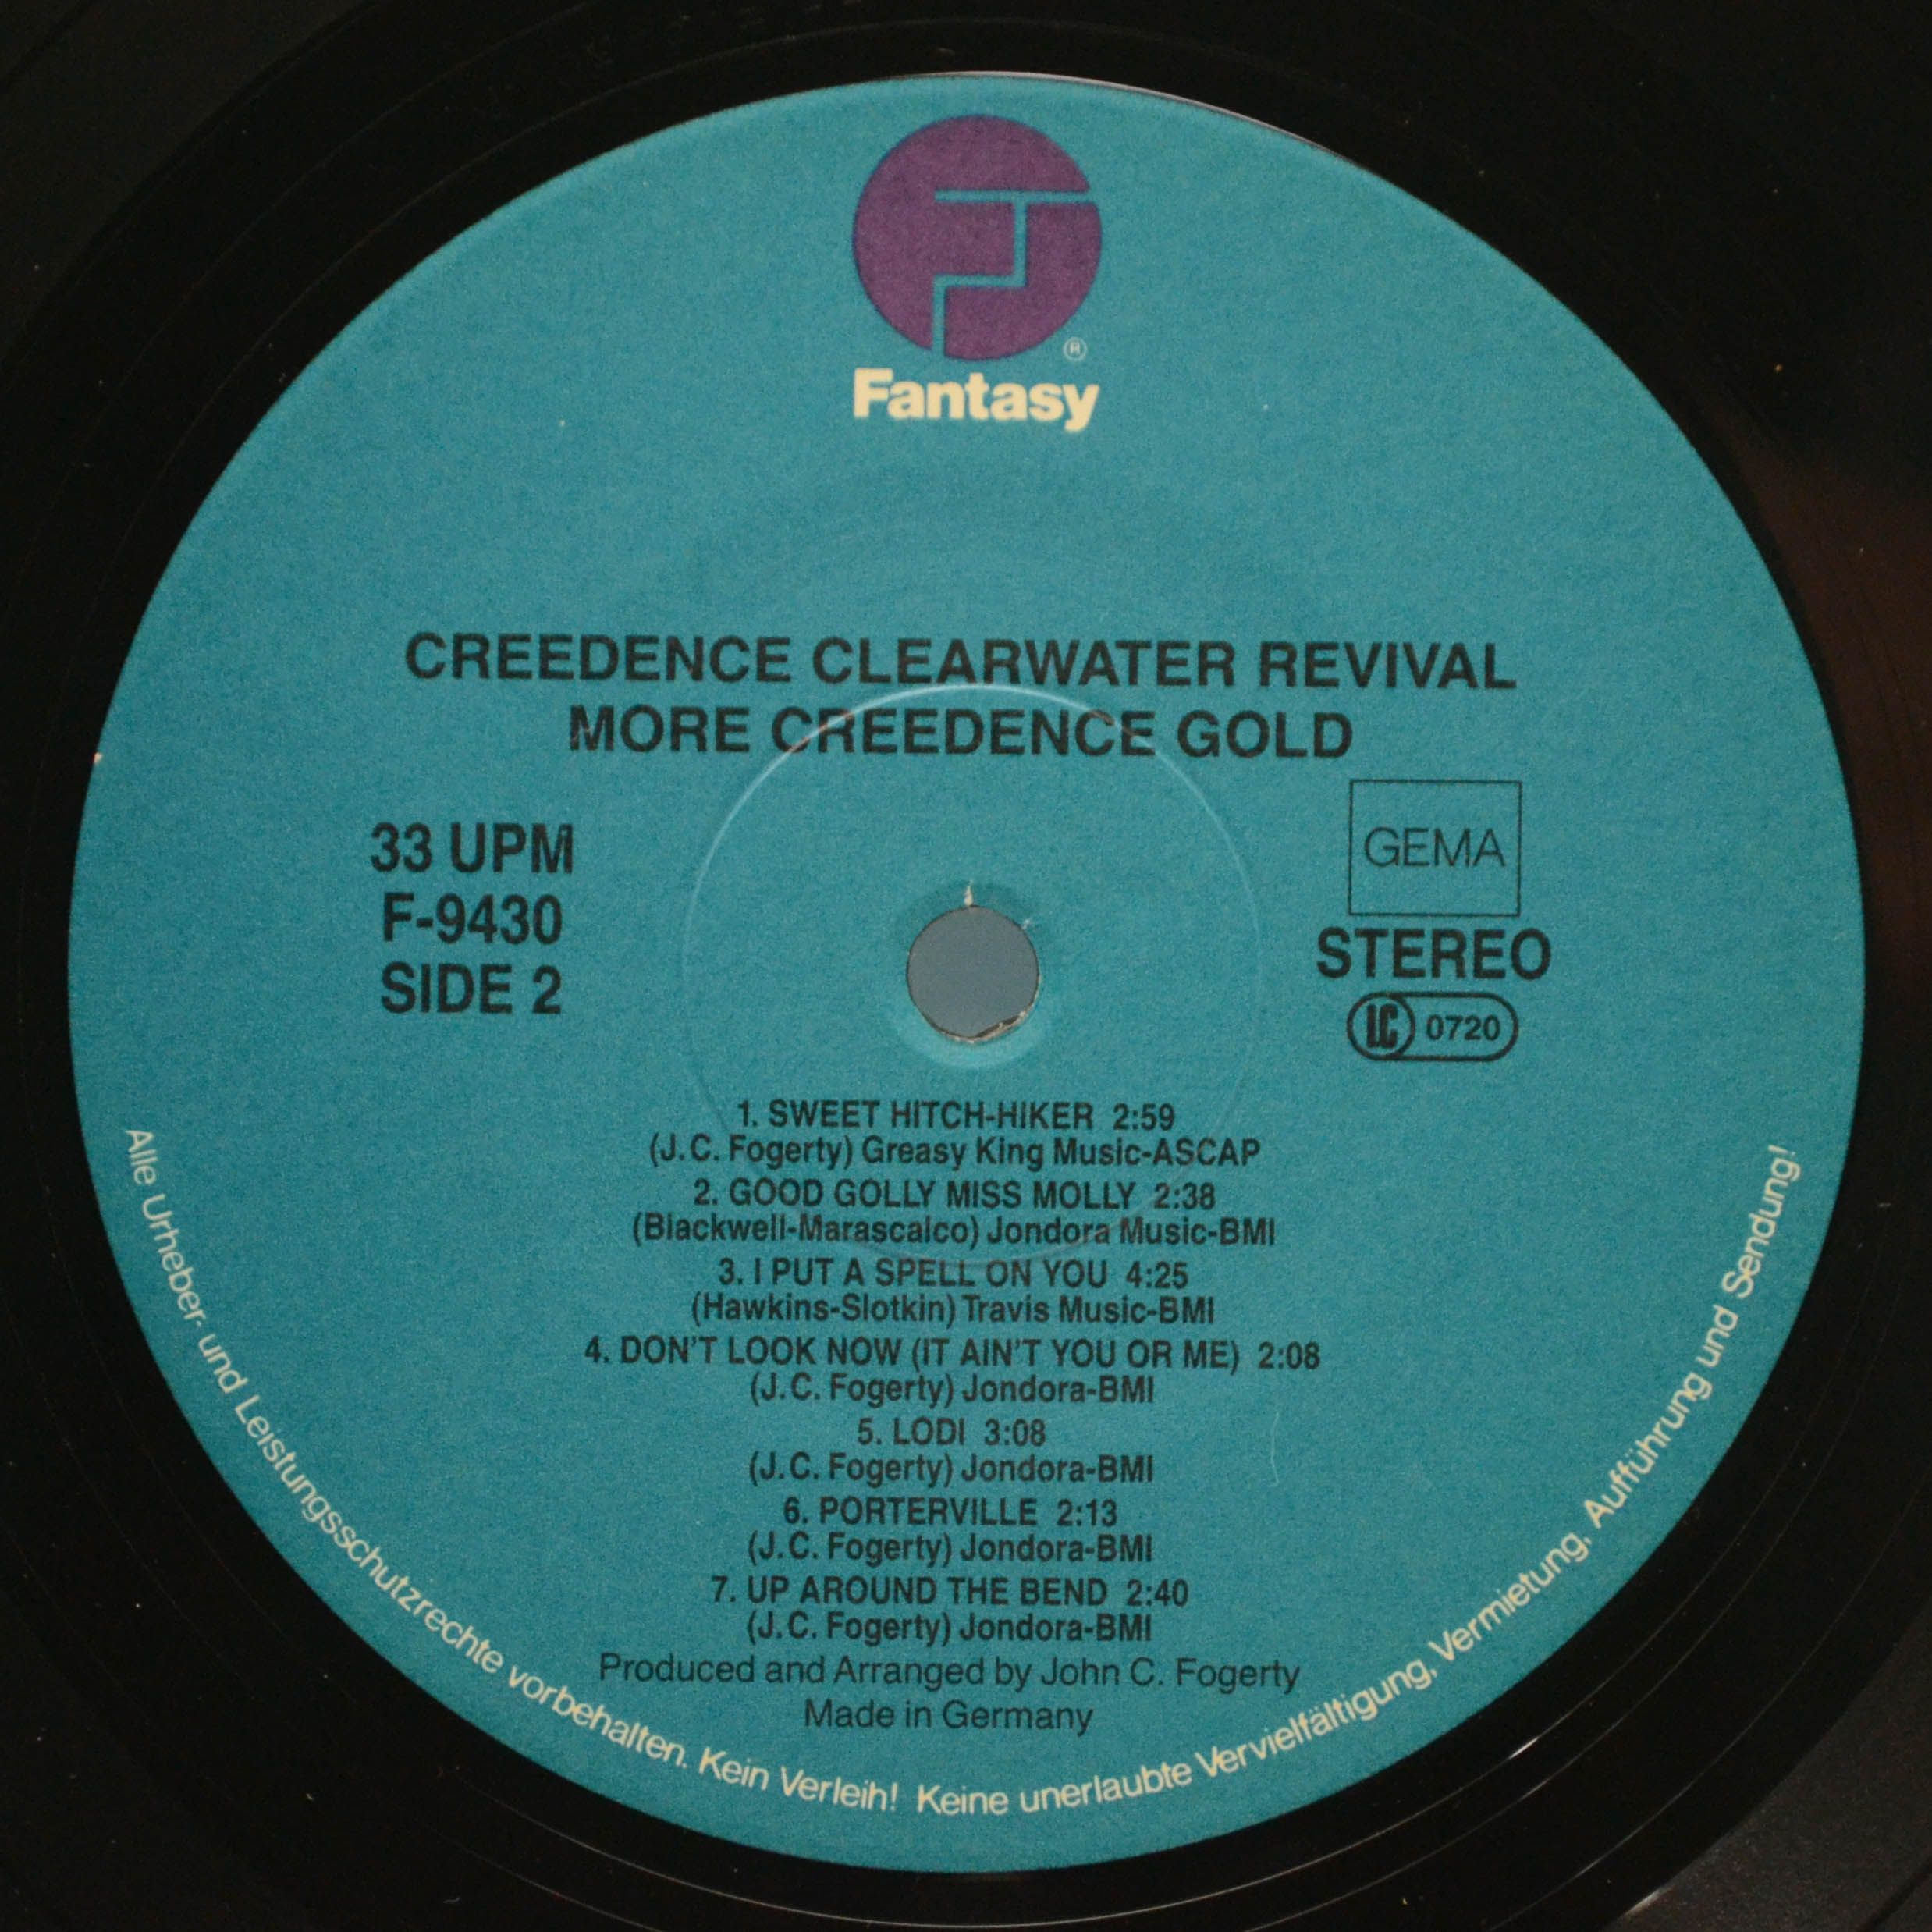 Creedence Clearwater Revival — More Creedence Gold, 1973